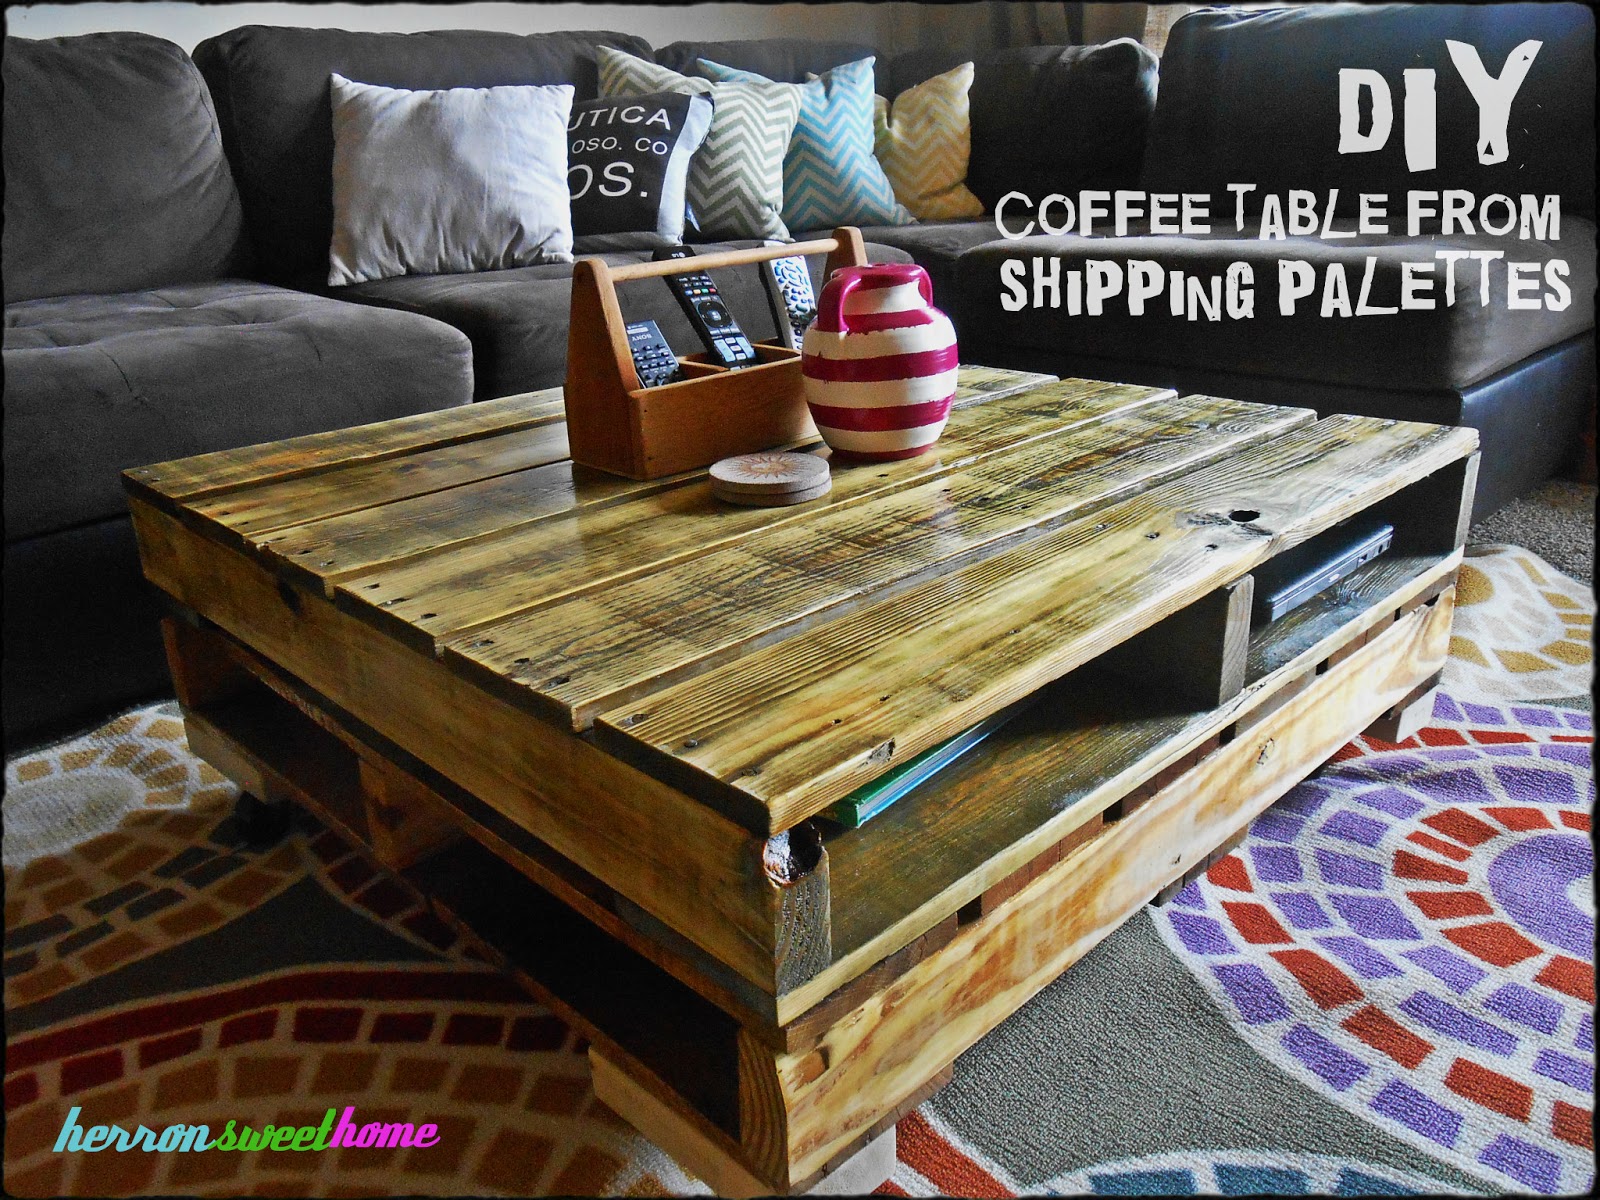 Chic a Cherry Cola: DIY Coffee Table made from Shipping Palettes